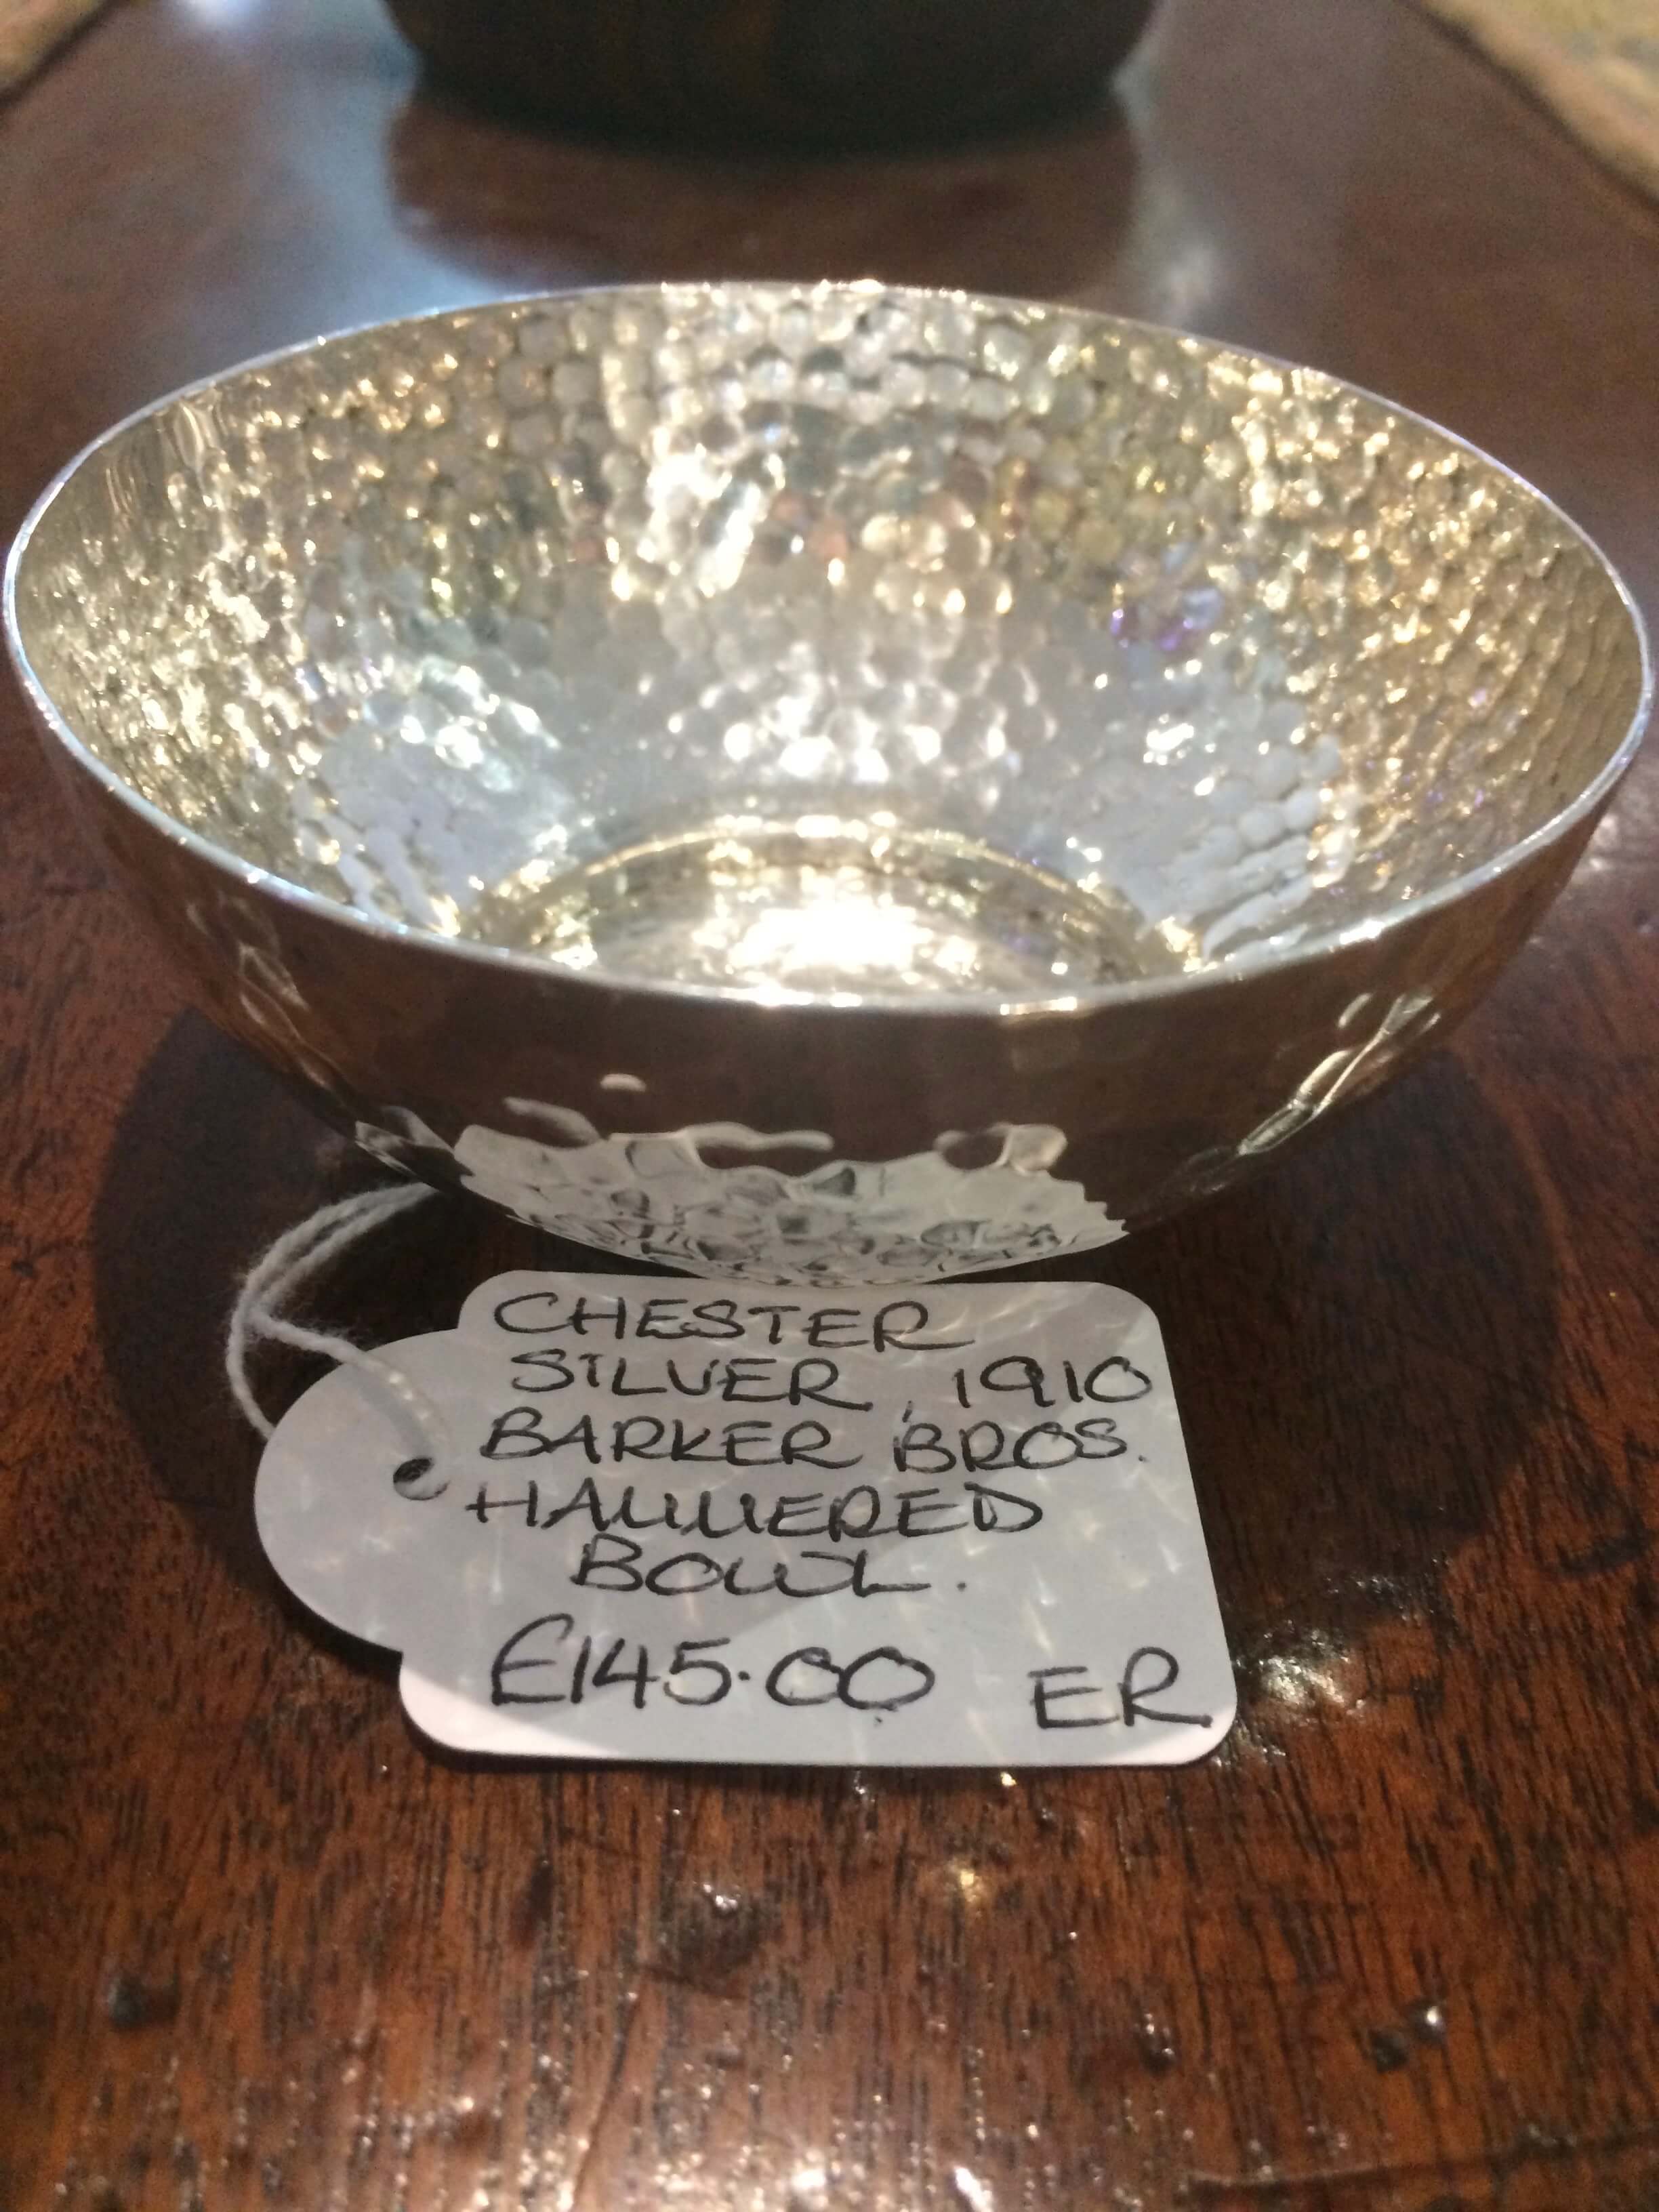 Hammered Silver Bowl